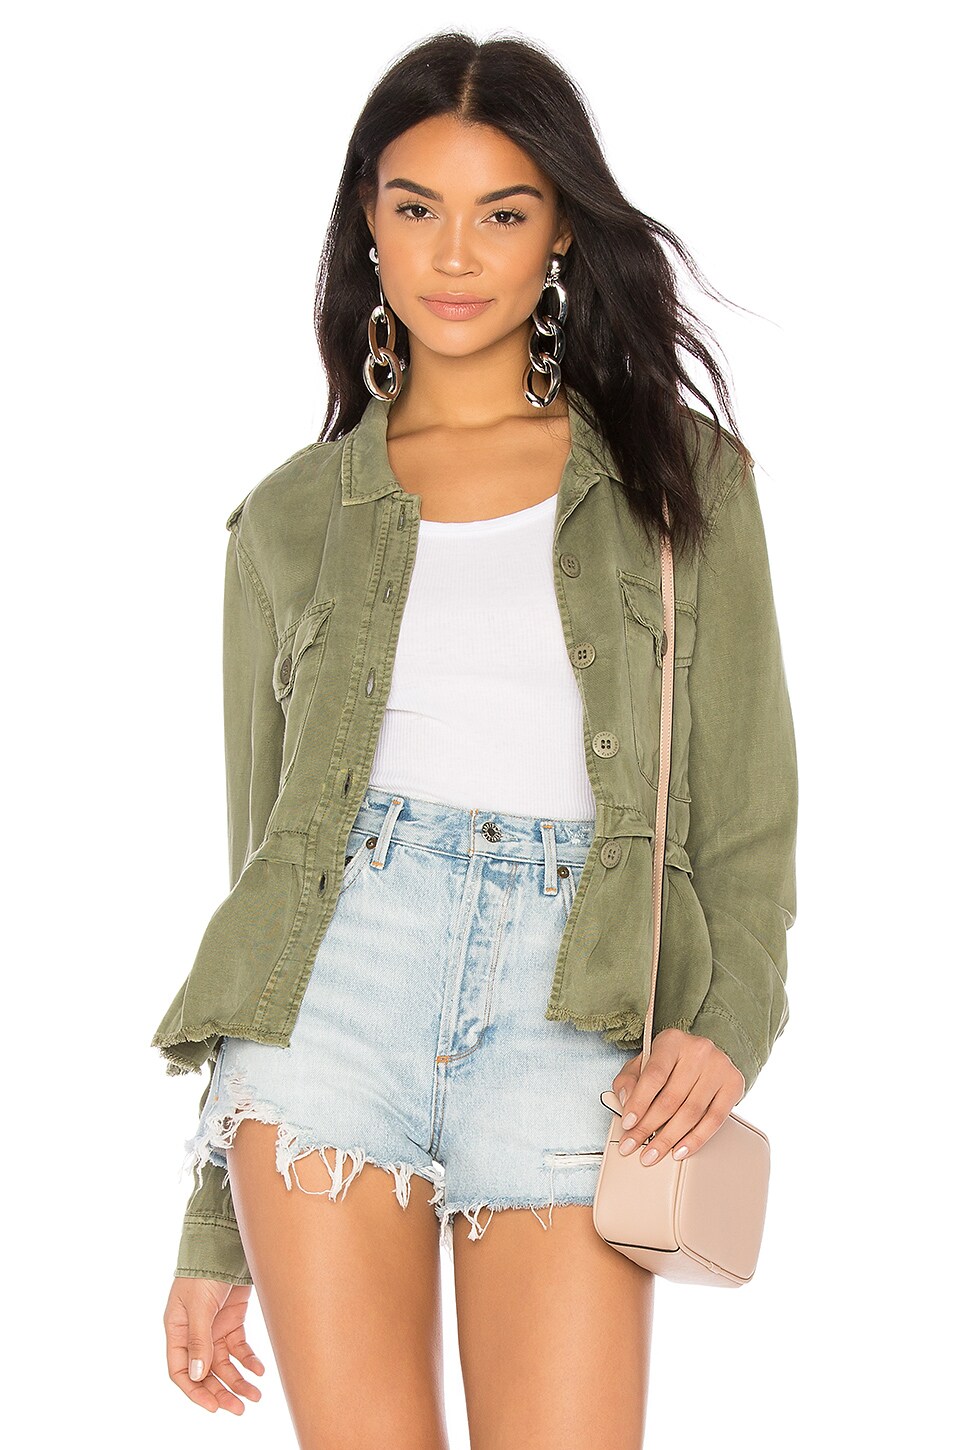 Sanctuary New Discovery Jacket in Cadet | REVOLVE